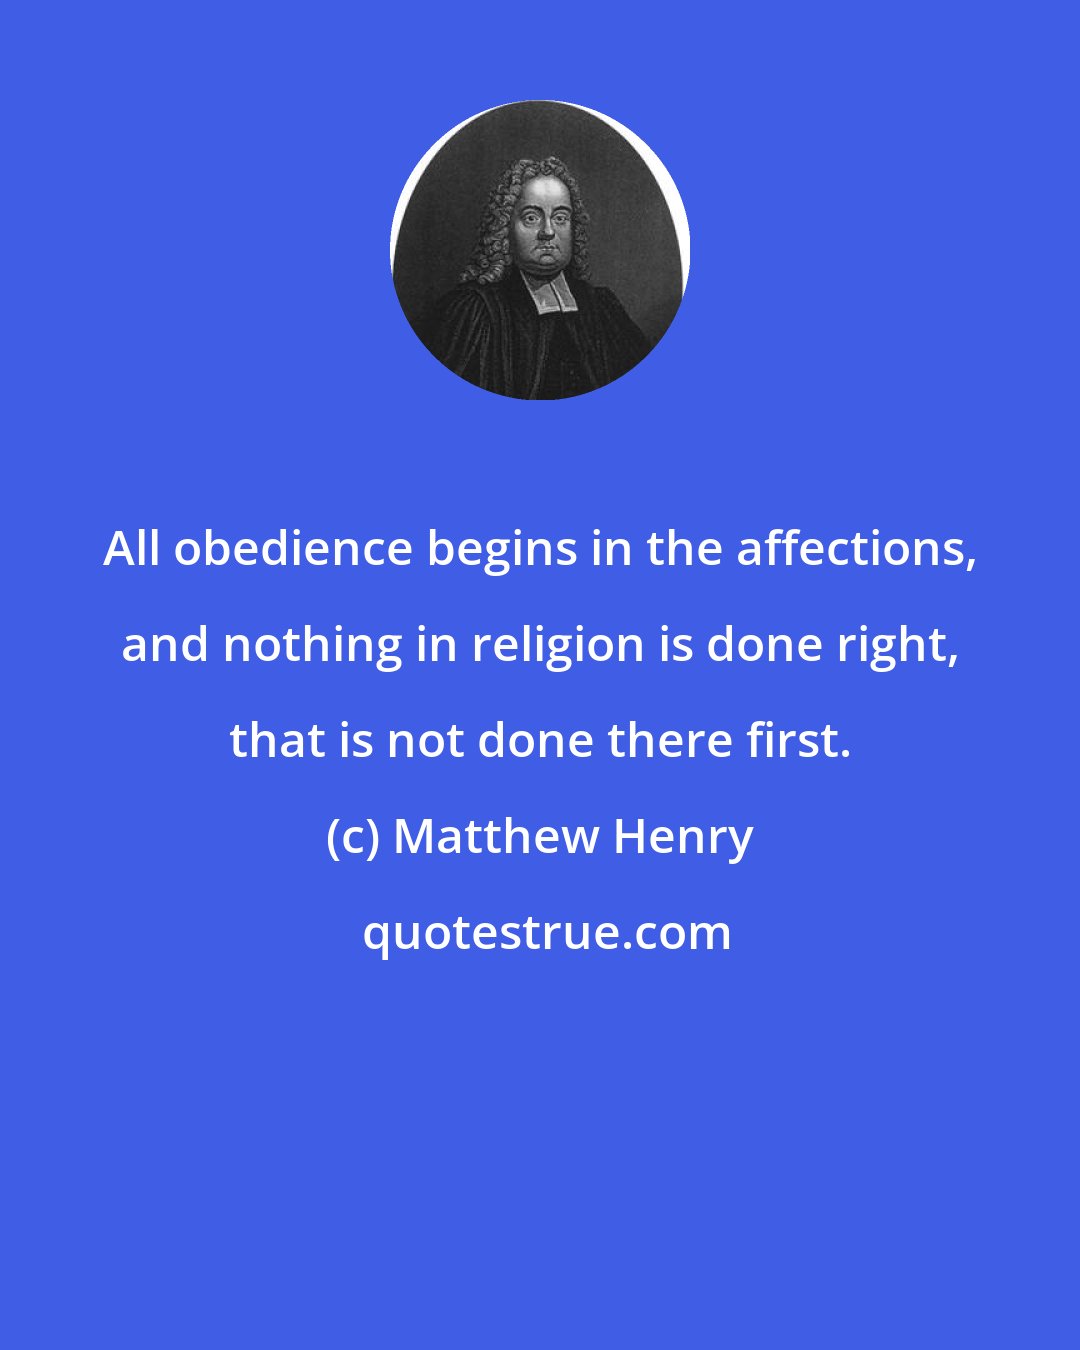 Matthew Henry: All obedience begins in the affections, and nothing in religion is done right, that is not done there first.